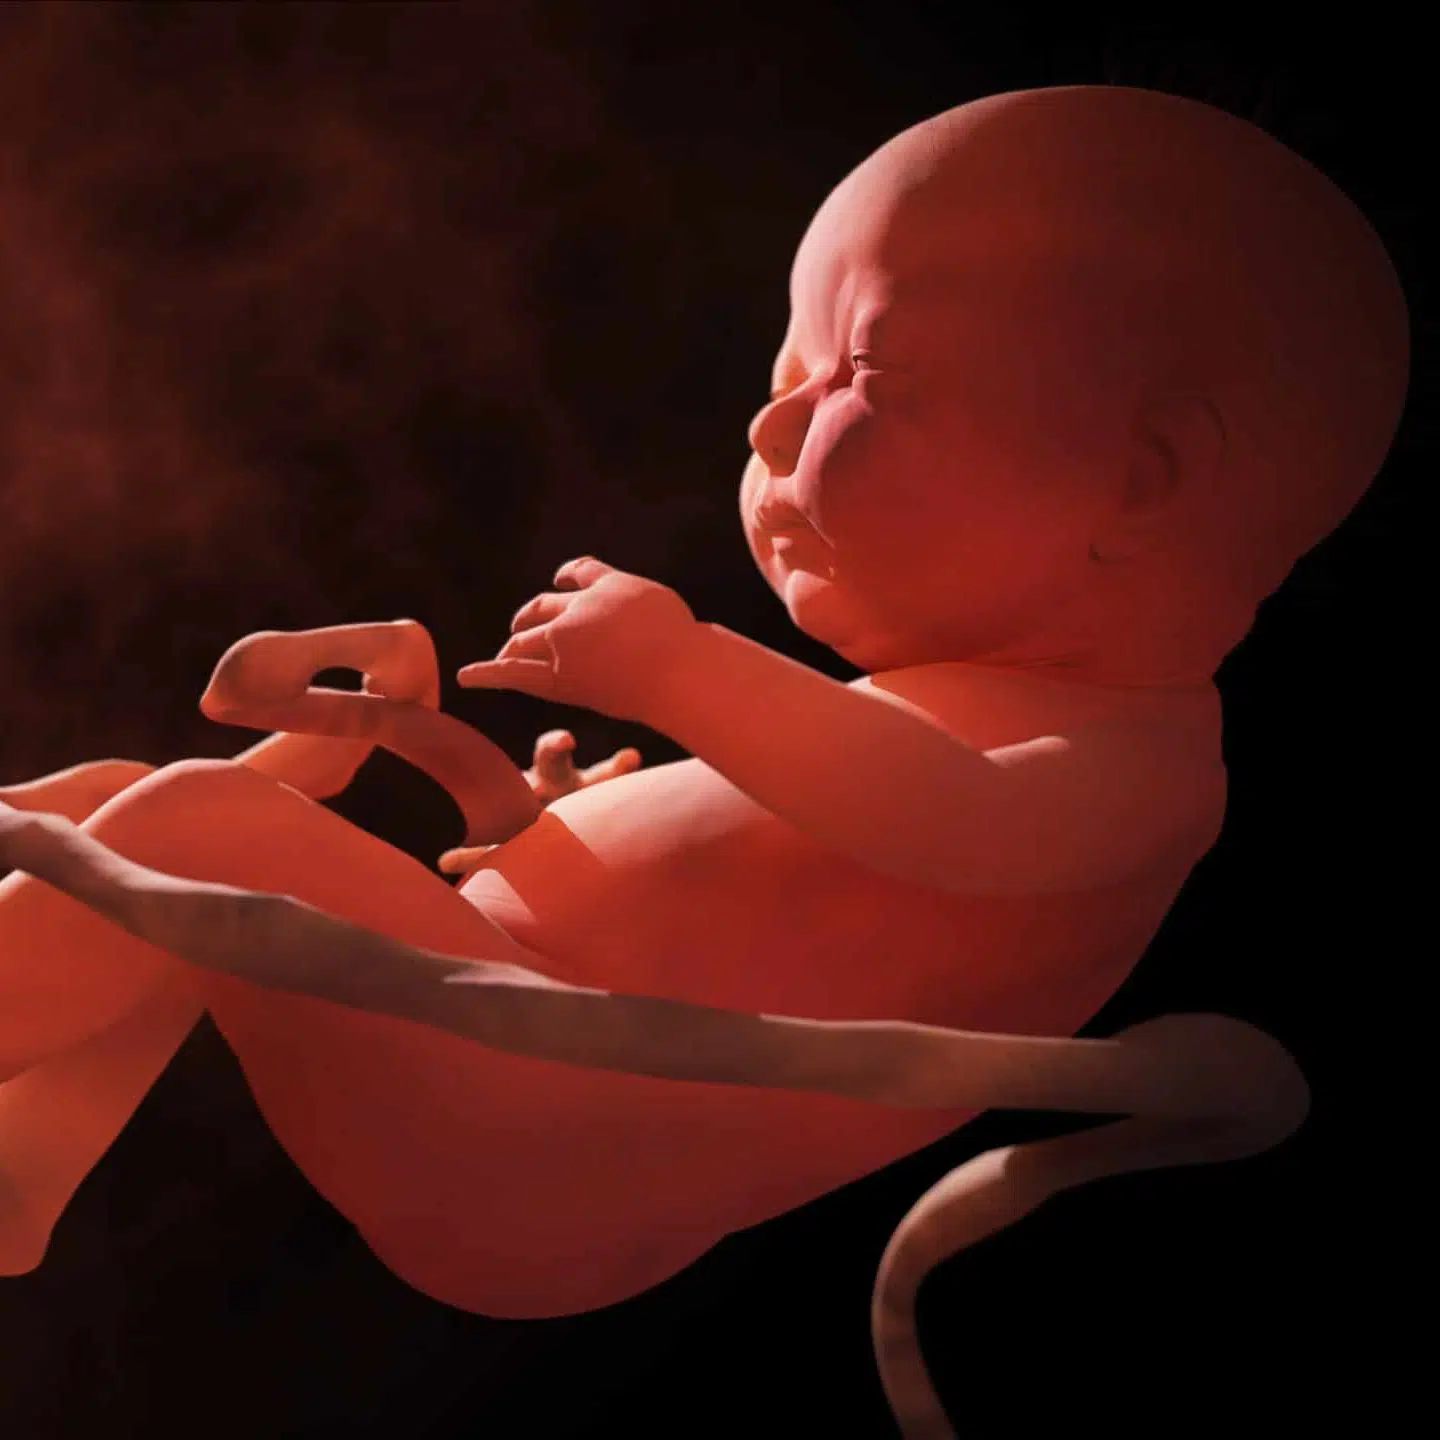 Child in the womb, embryo. 3d rendering